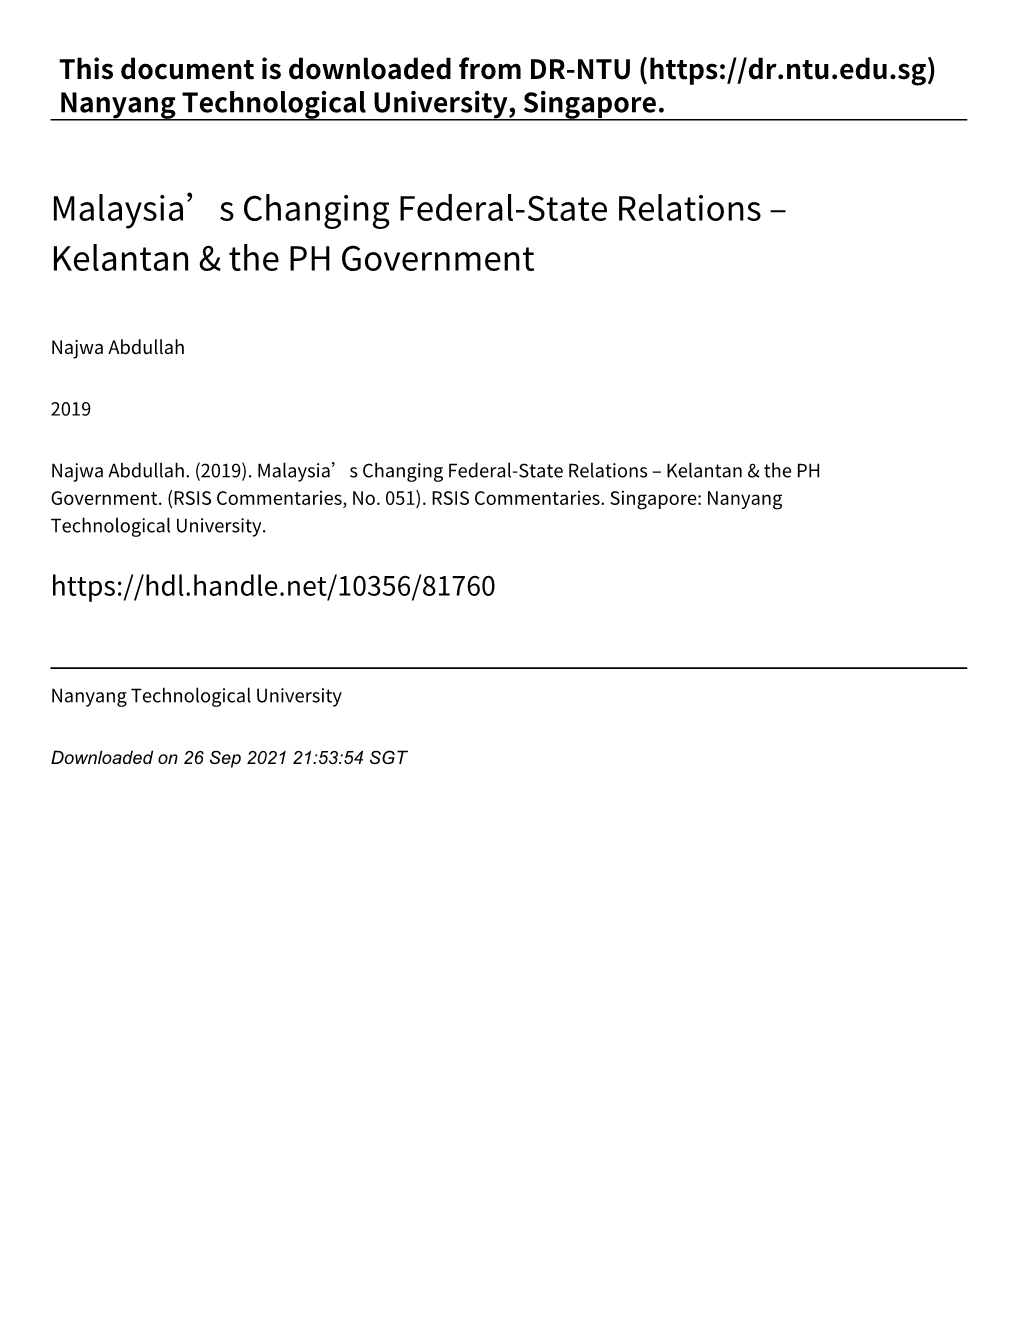 Malaysia's Changing Federal‑State Relations – Kelantan & the PH Government